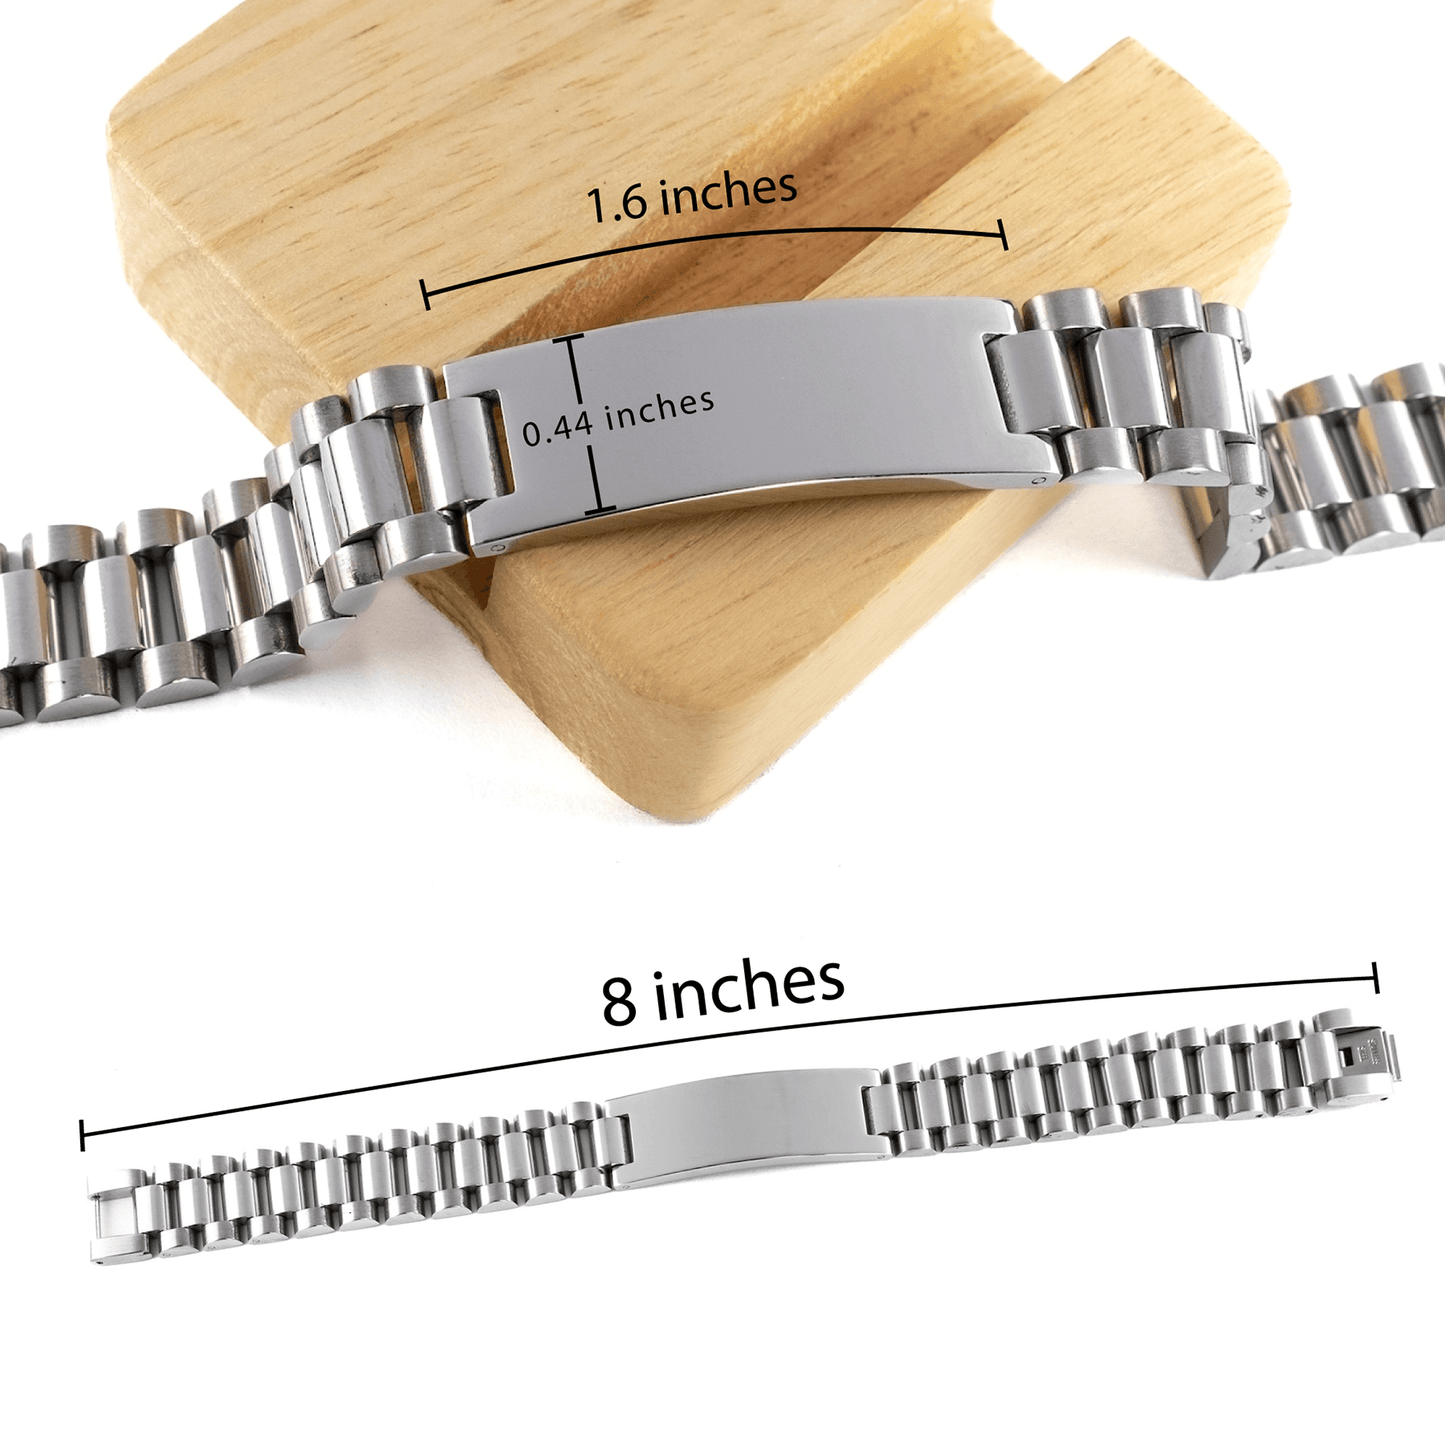 Nanny Ladder Stainless Steel Engraved Bracelet - Thanks for being who you are - Birthday Christmas Jewelry Gifts Coworkers Colleague Boss - Mallard Moon Gift Shop